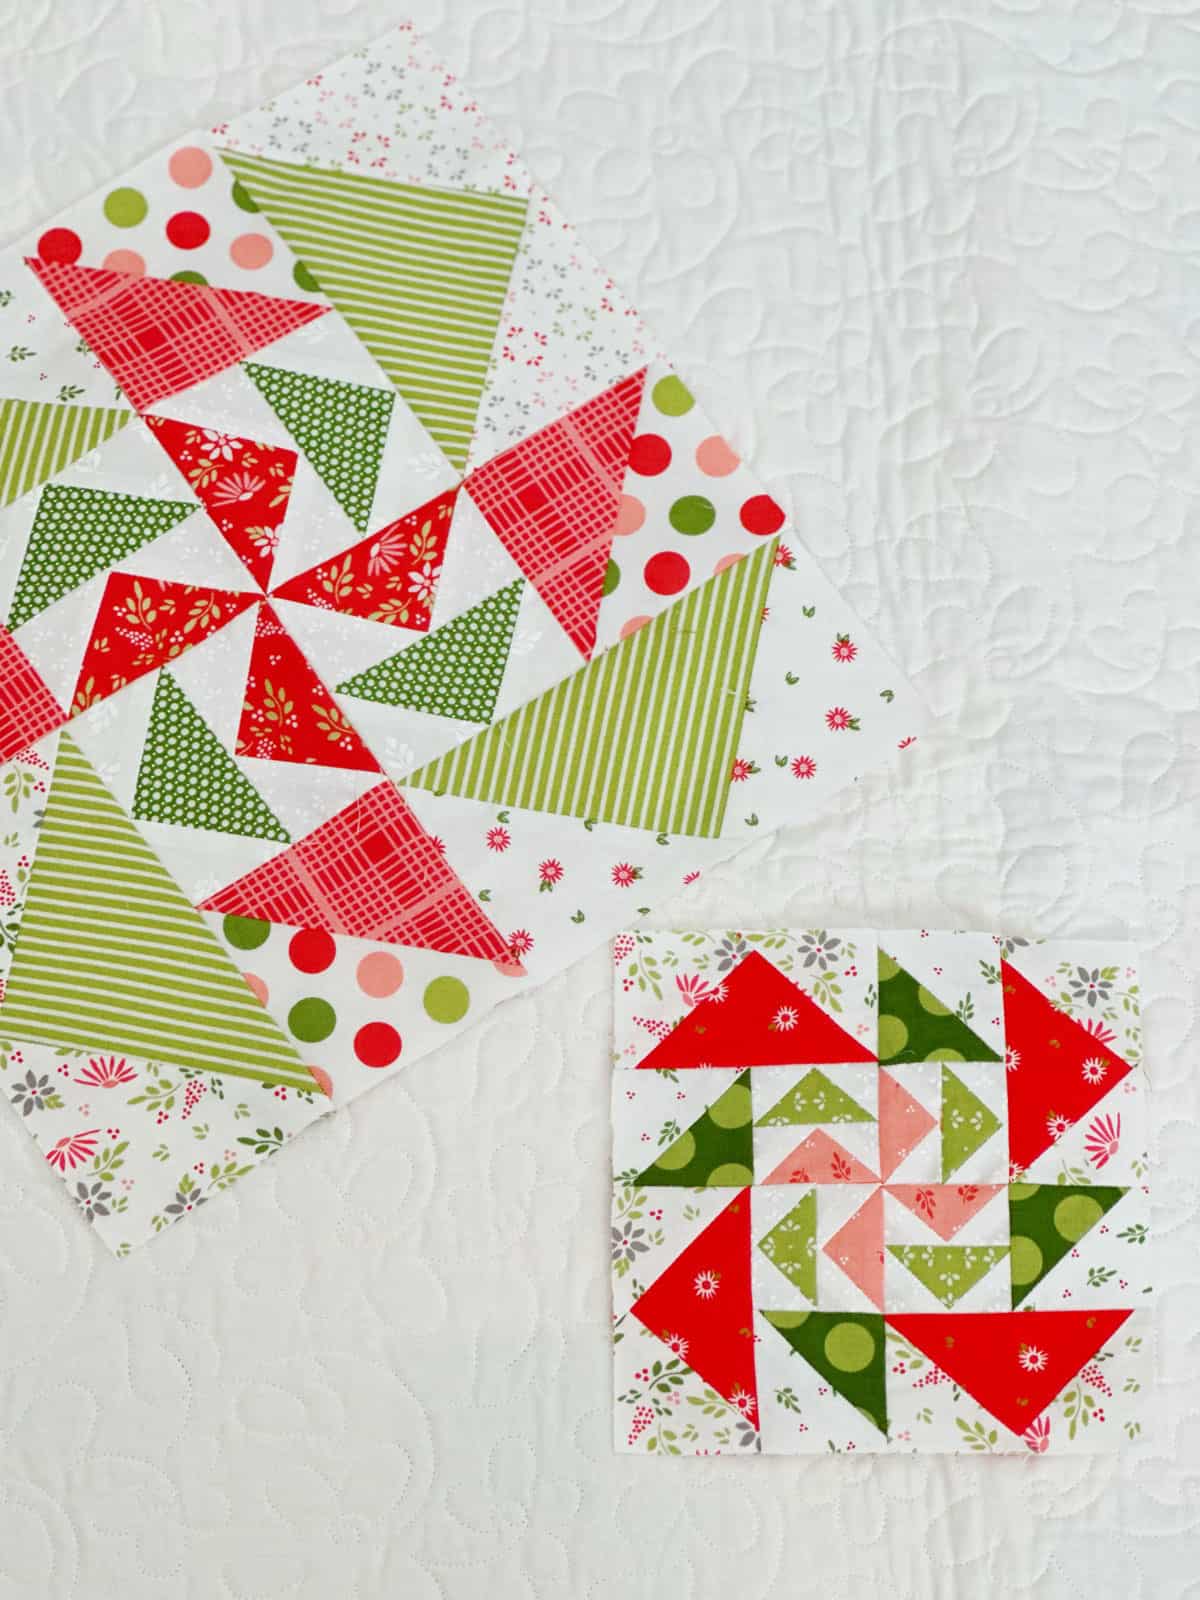 Quilt Block of the Month June 2023 featured by Top US Quilt Blog, A Quilting Life